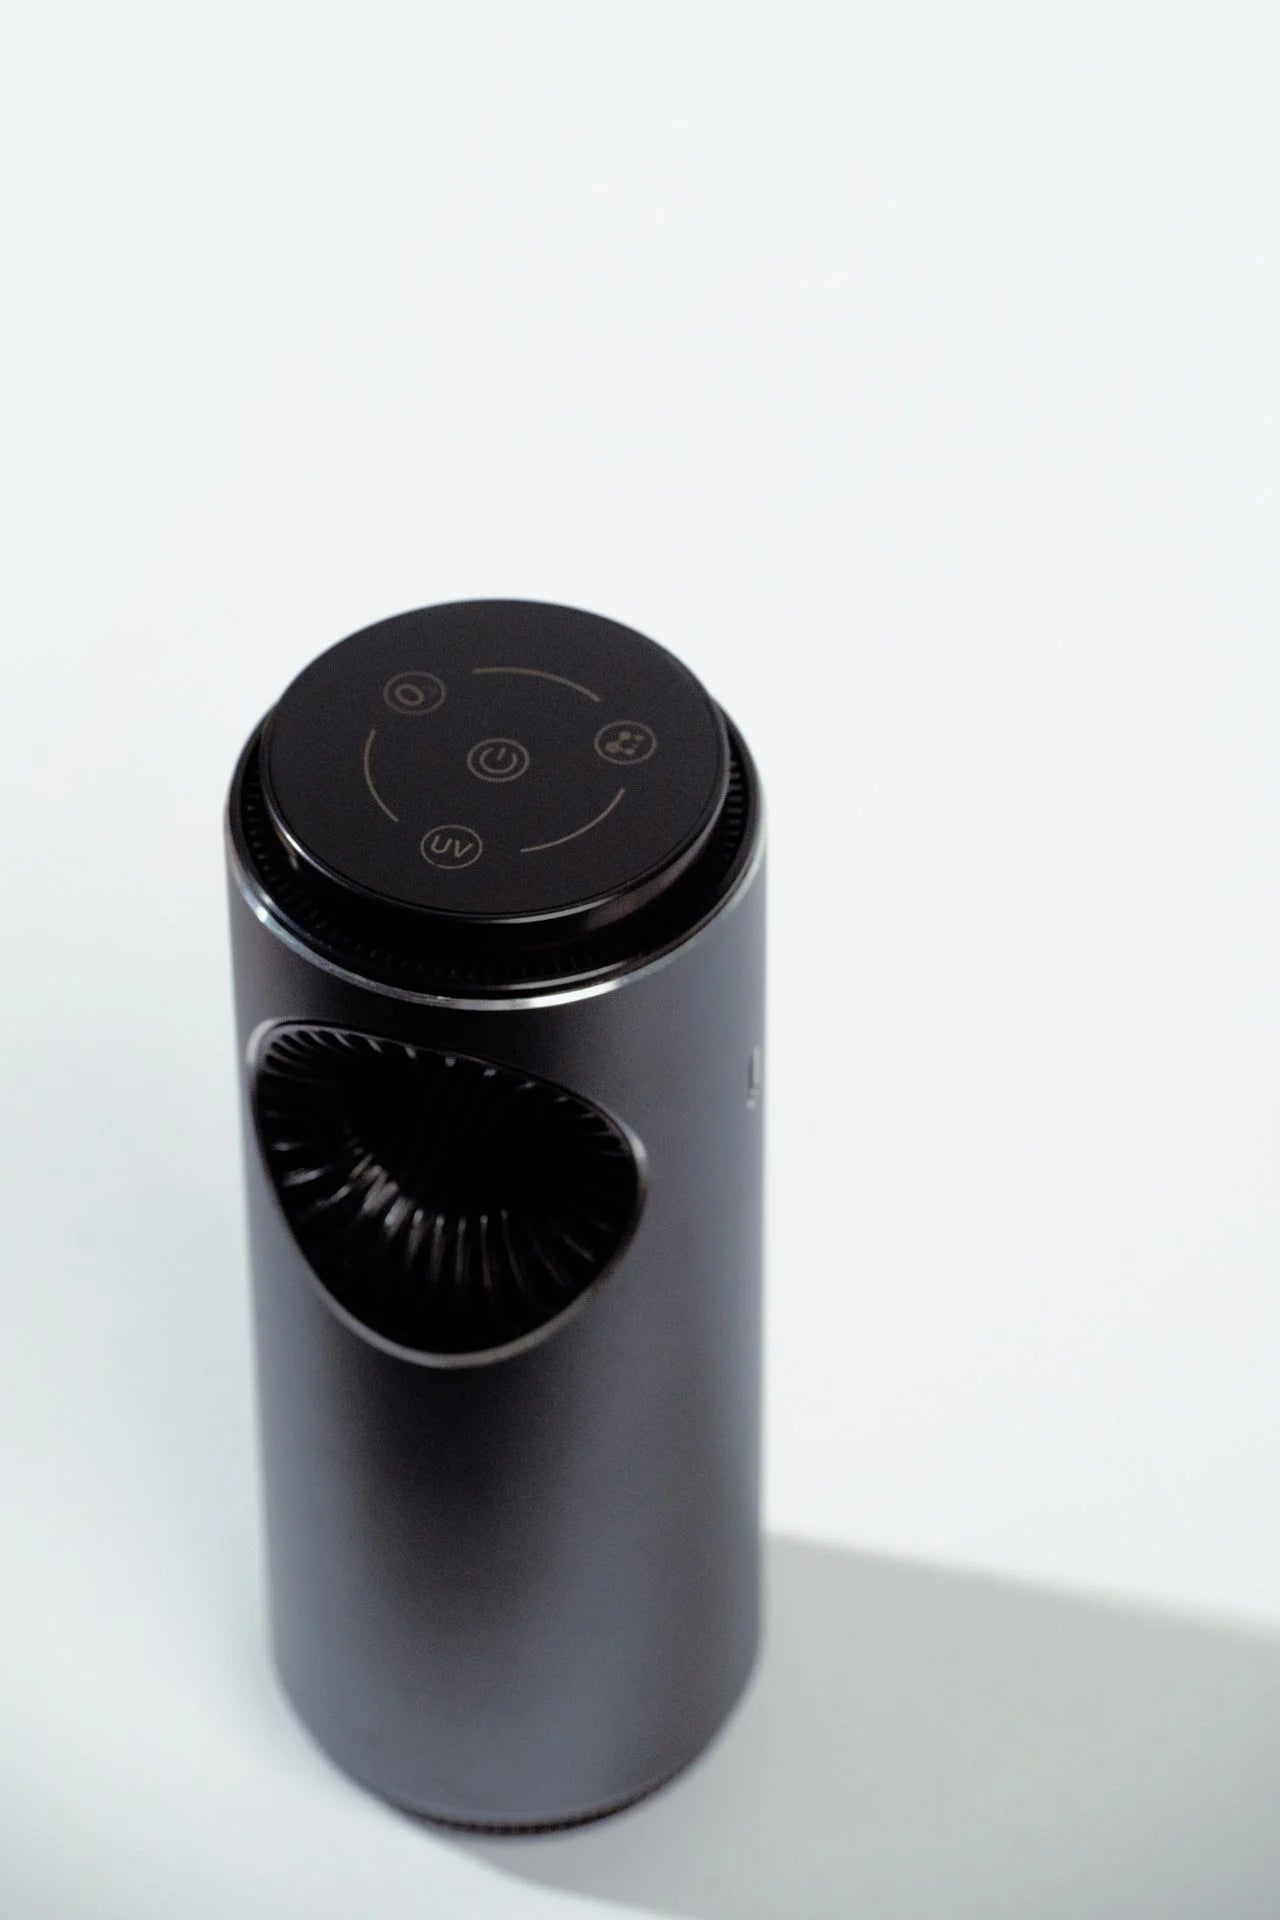 Top Display Ionizing Air Purifier